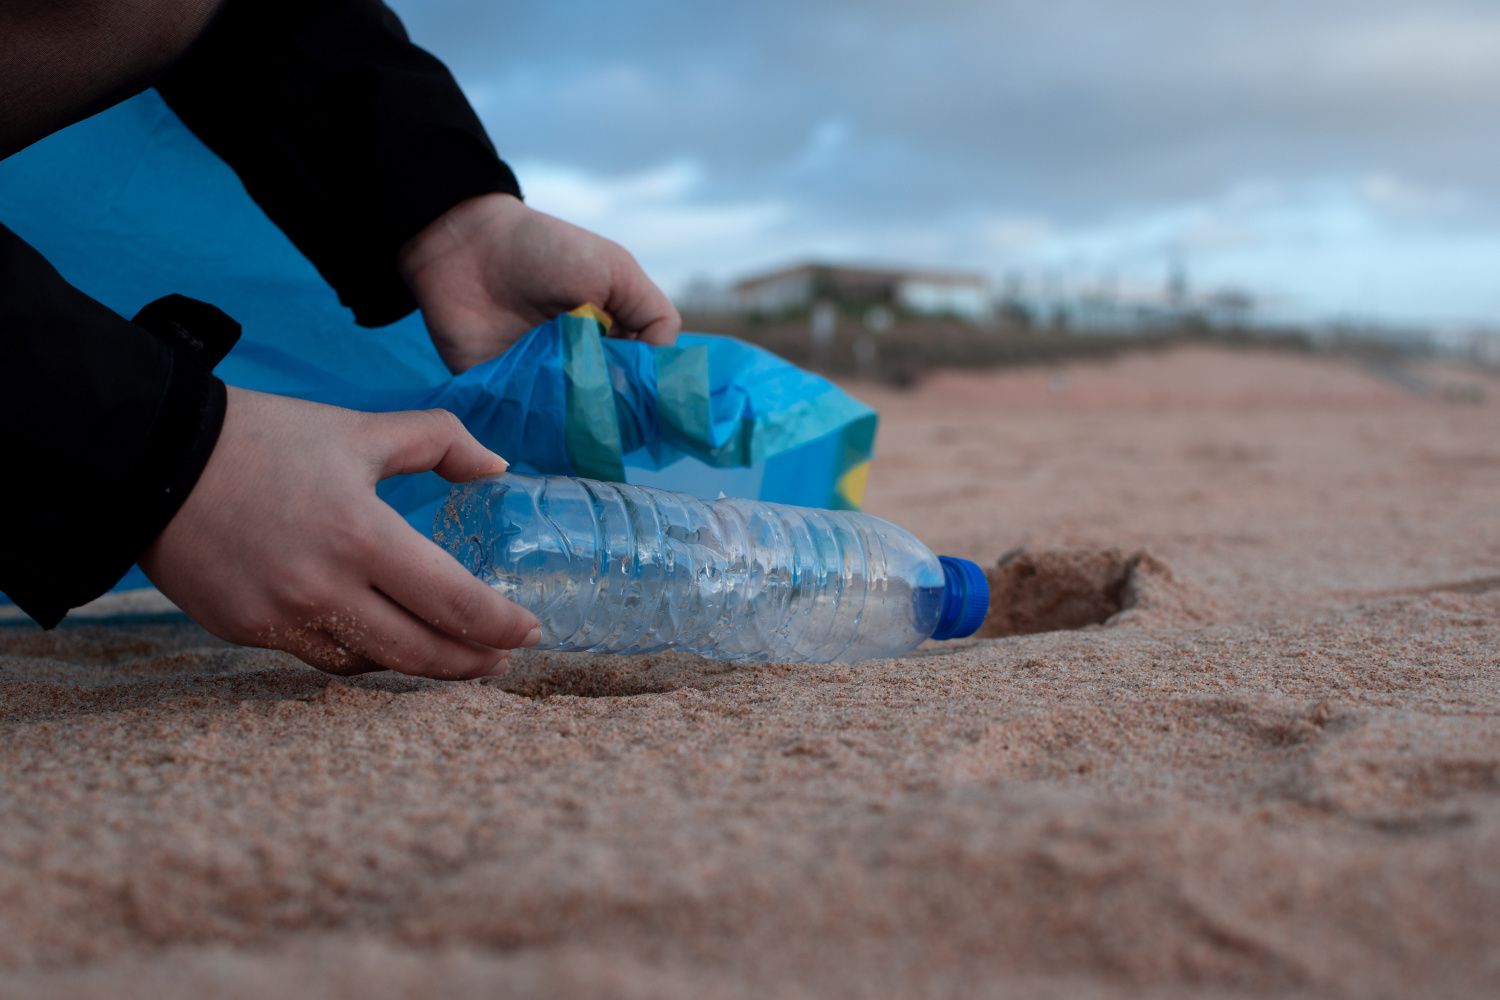 Person picking up plastic water bottle out of the send on a beach near the water.